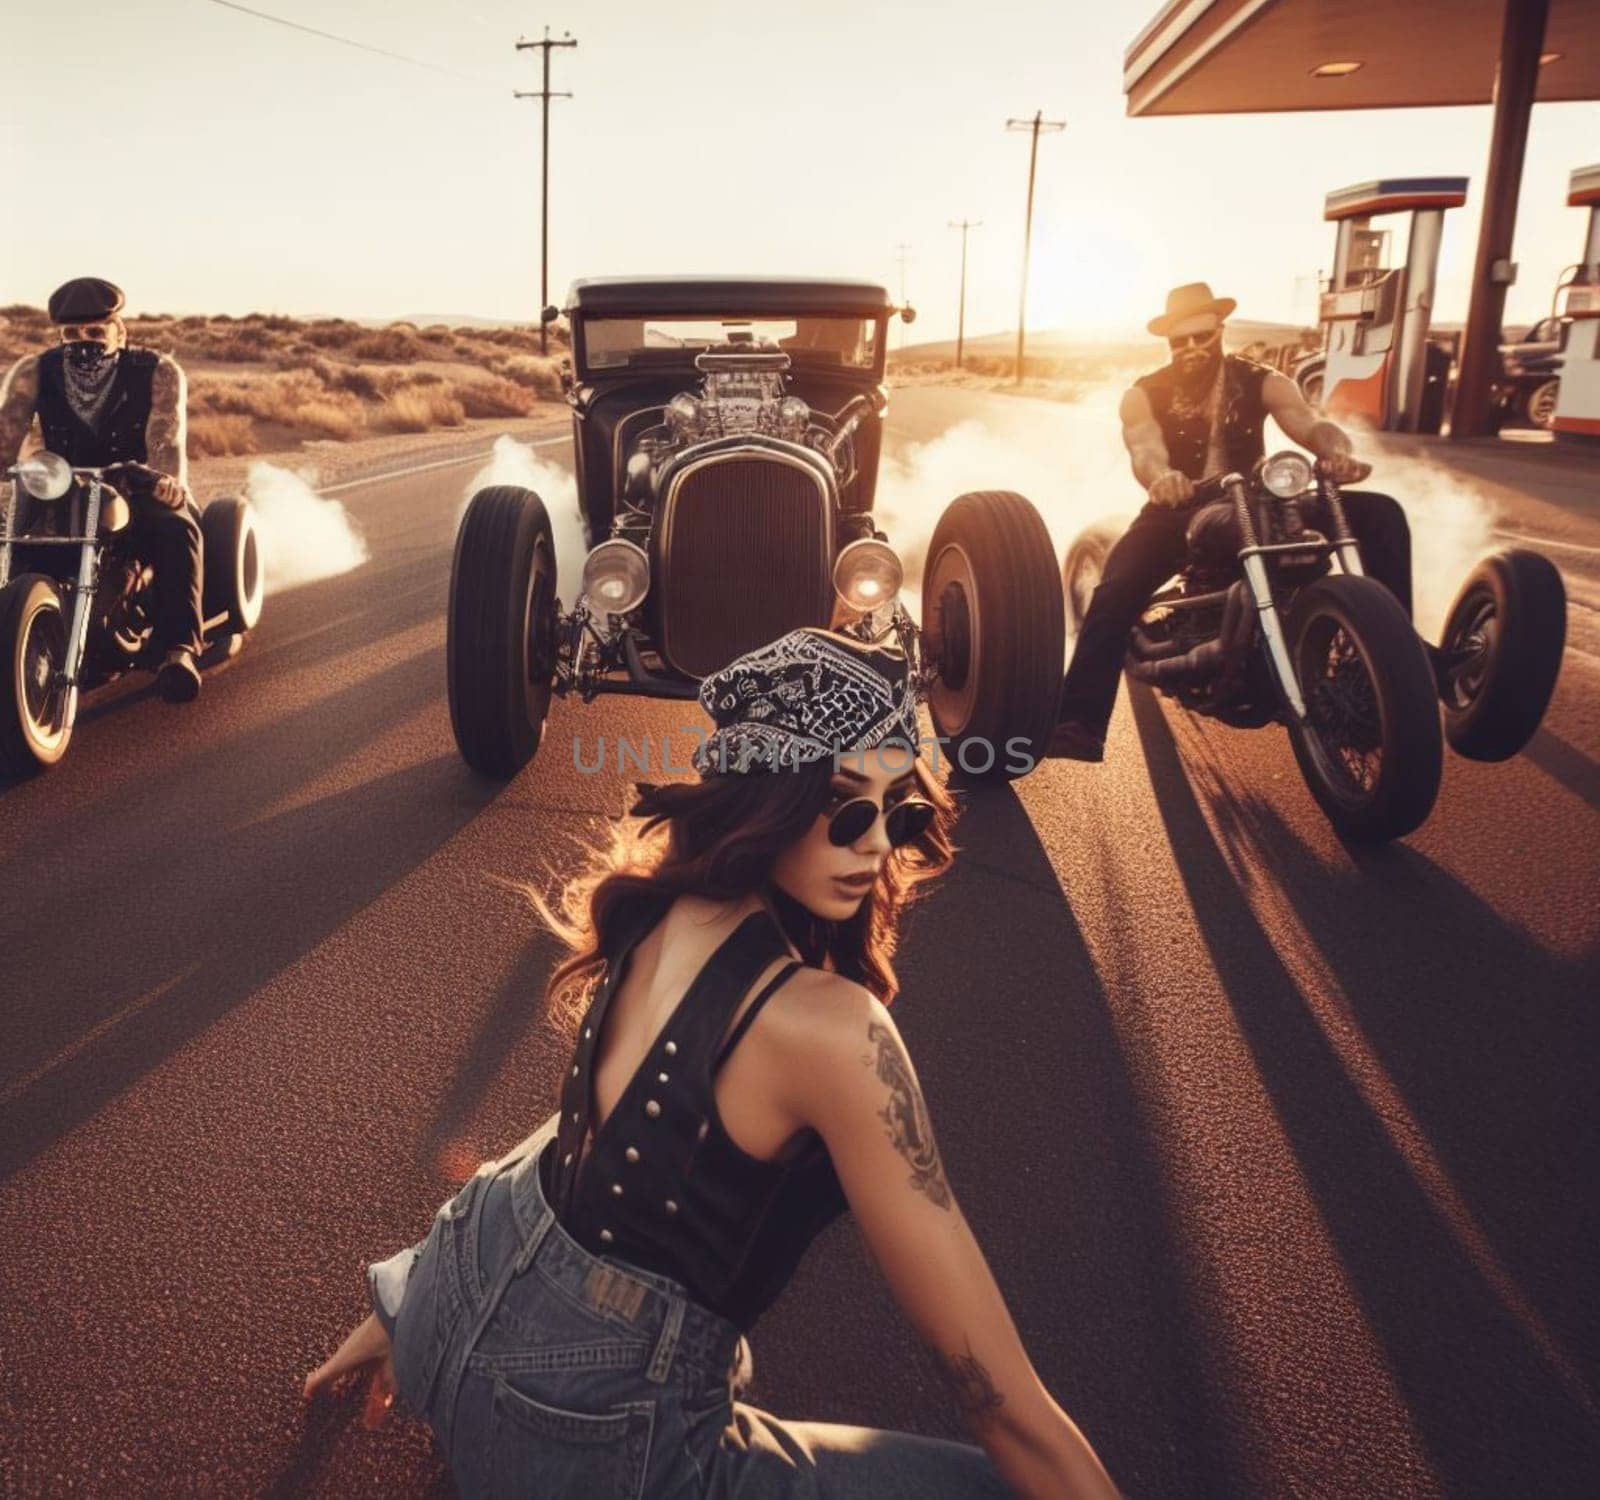 pinup girl, hipster vandals gang of criminal wear jeans, leather, drive steampunk hotrods, bikes by verbano